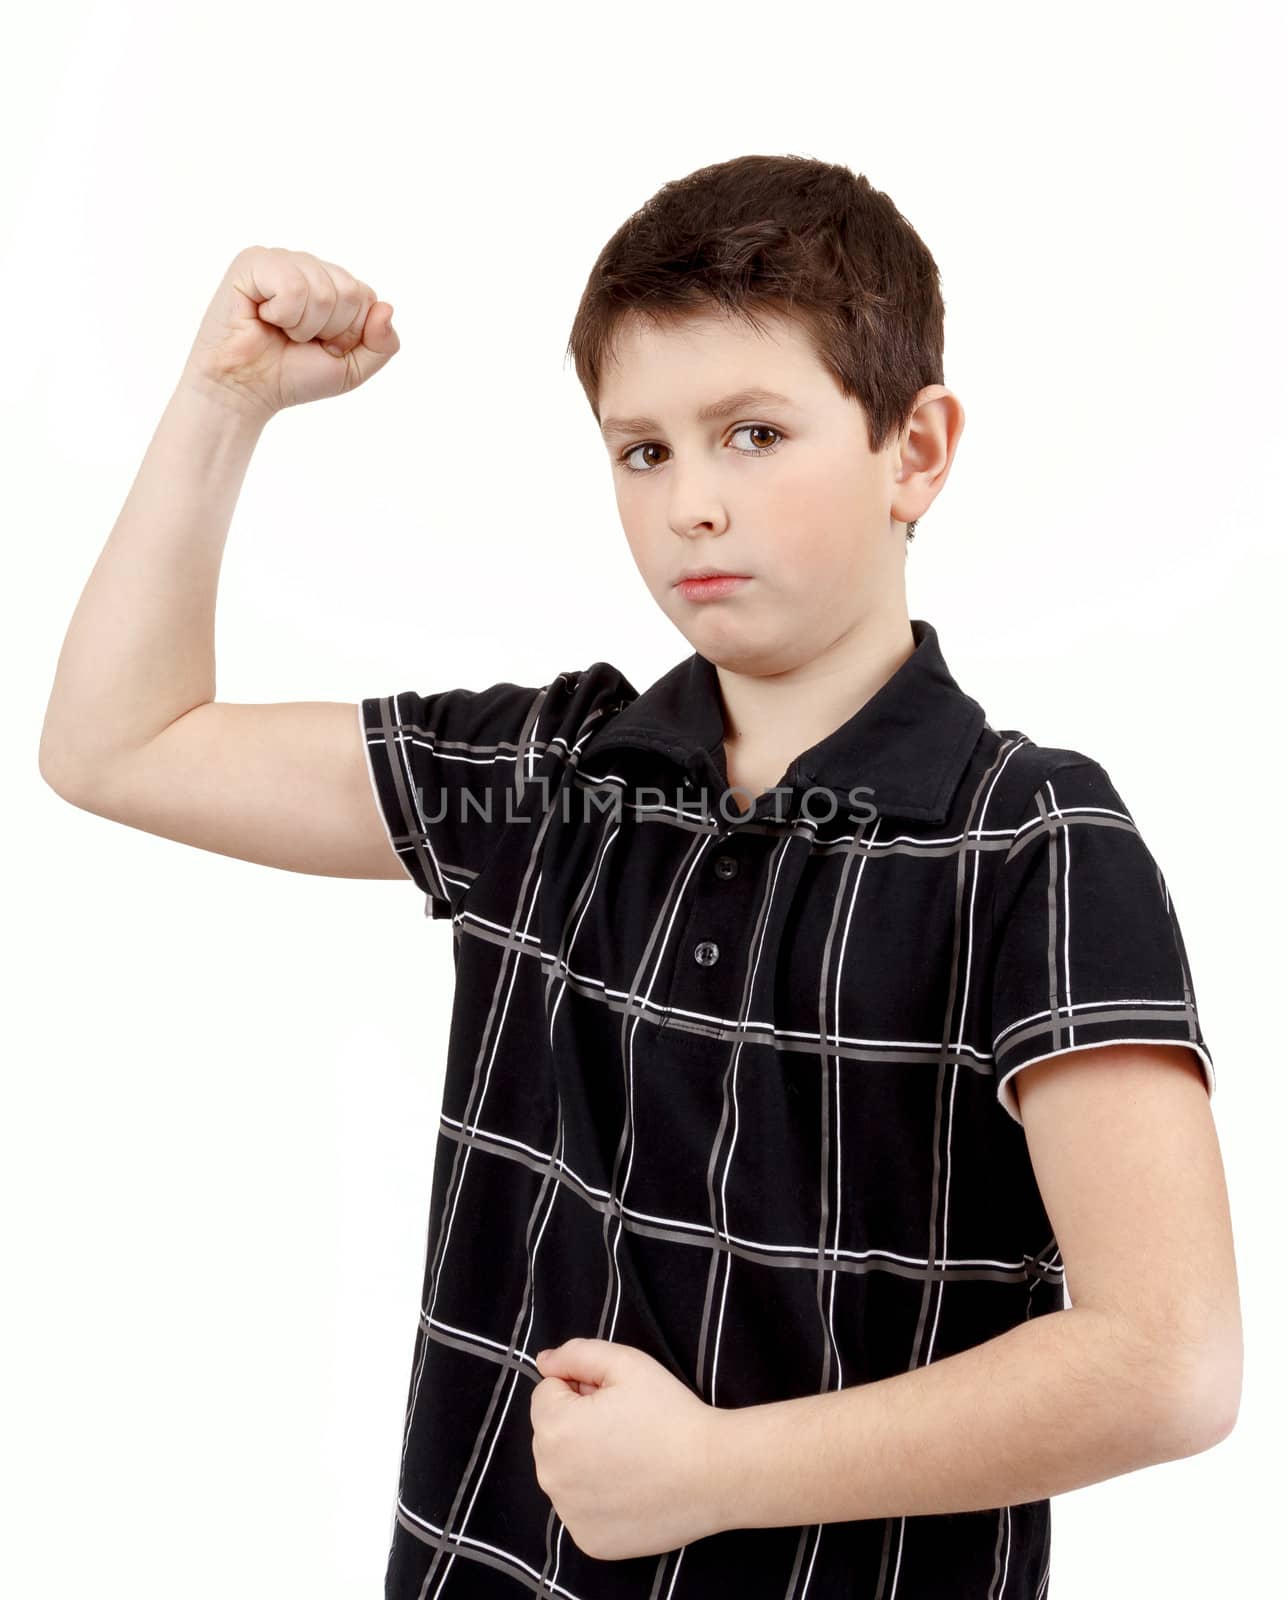 Portrait of a young boy with hand raised up and showing muscles by artush